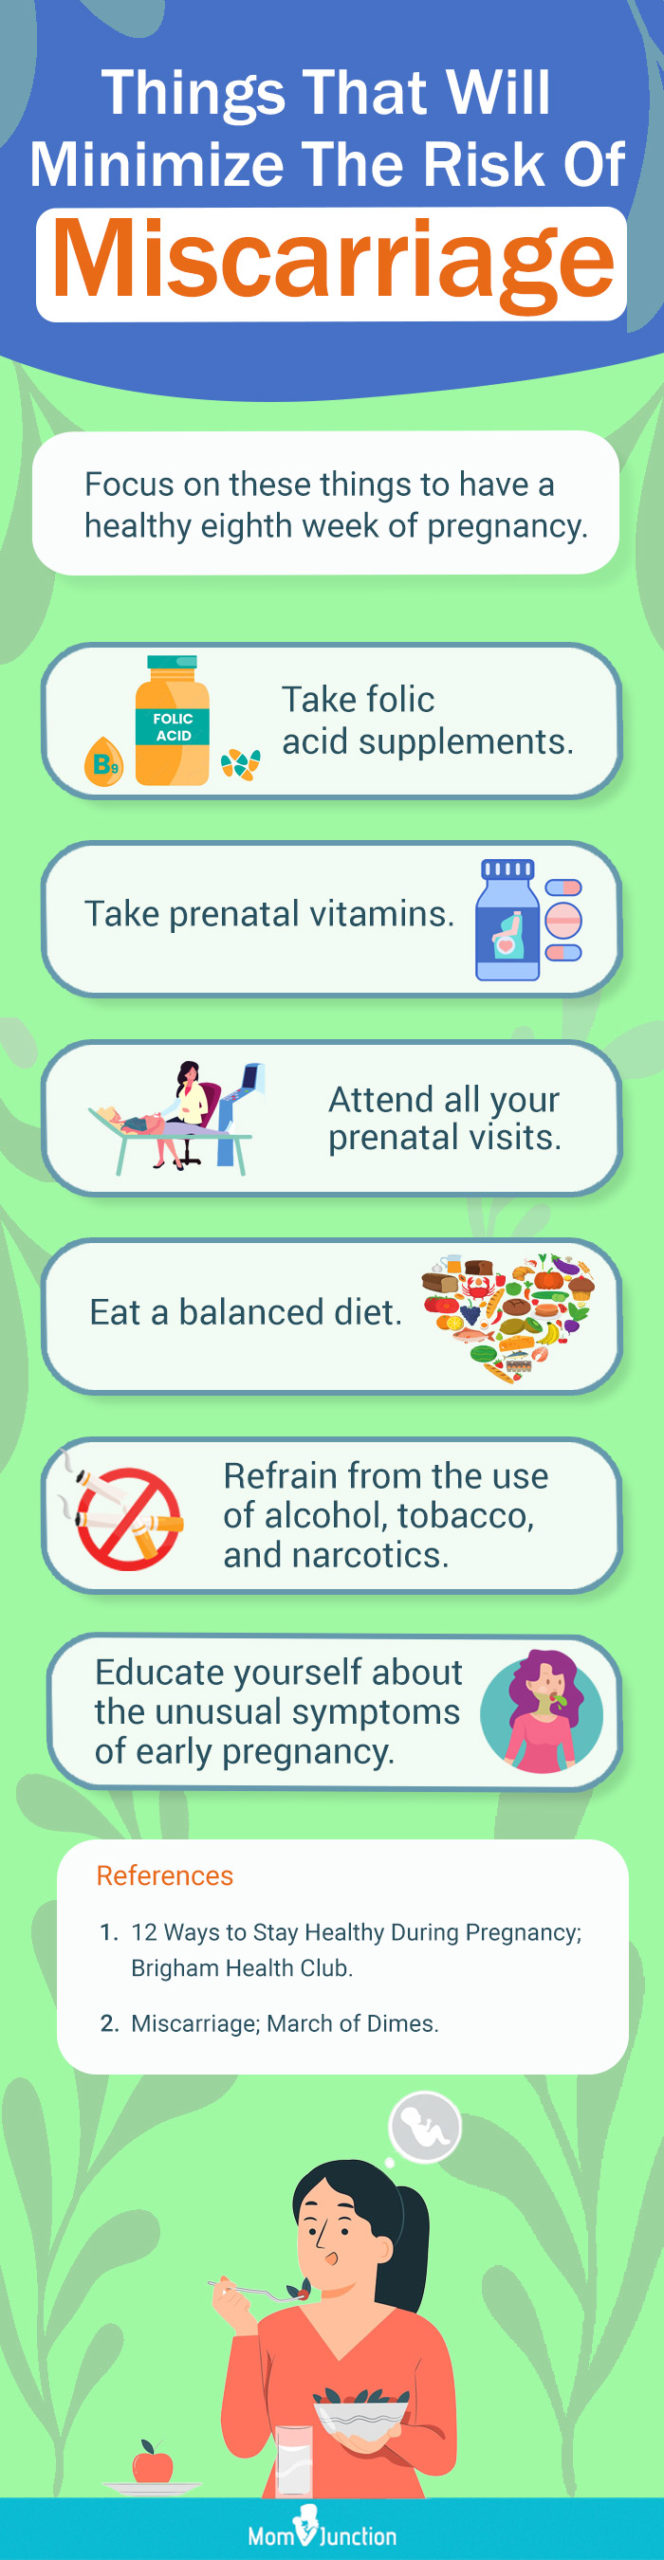 things that will minimize the risk of miscarriage than worrying [infographic]